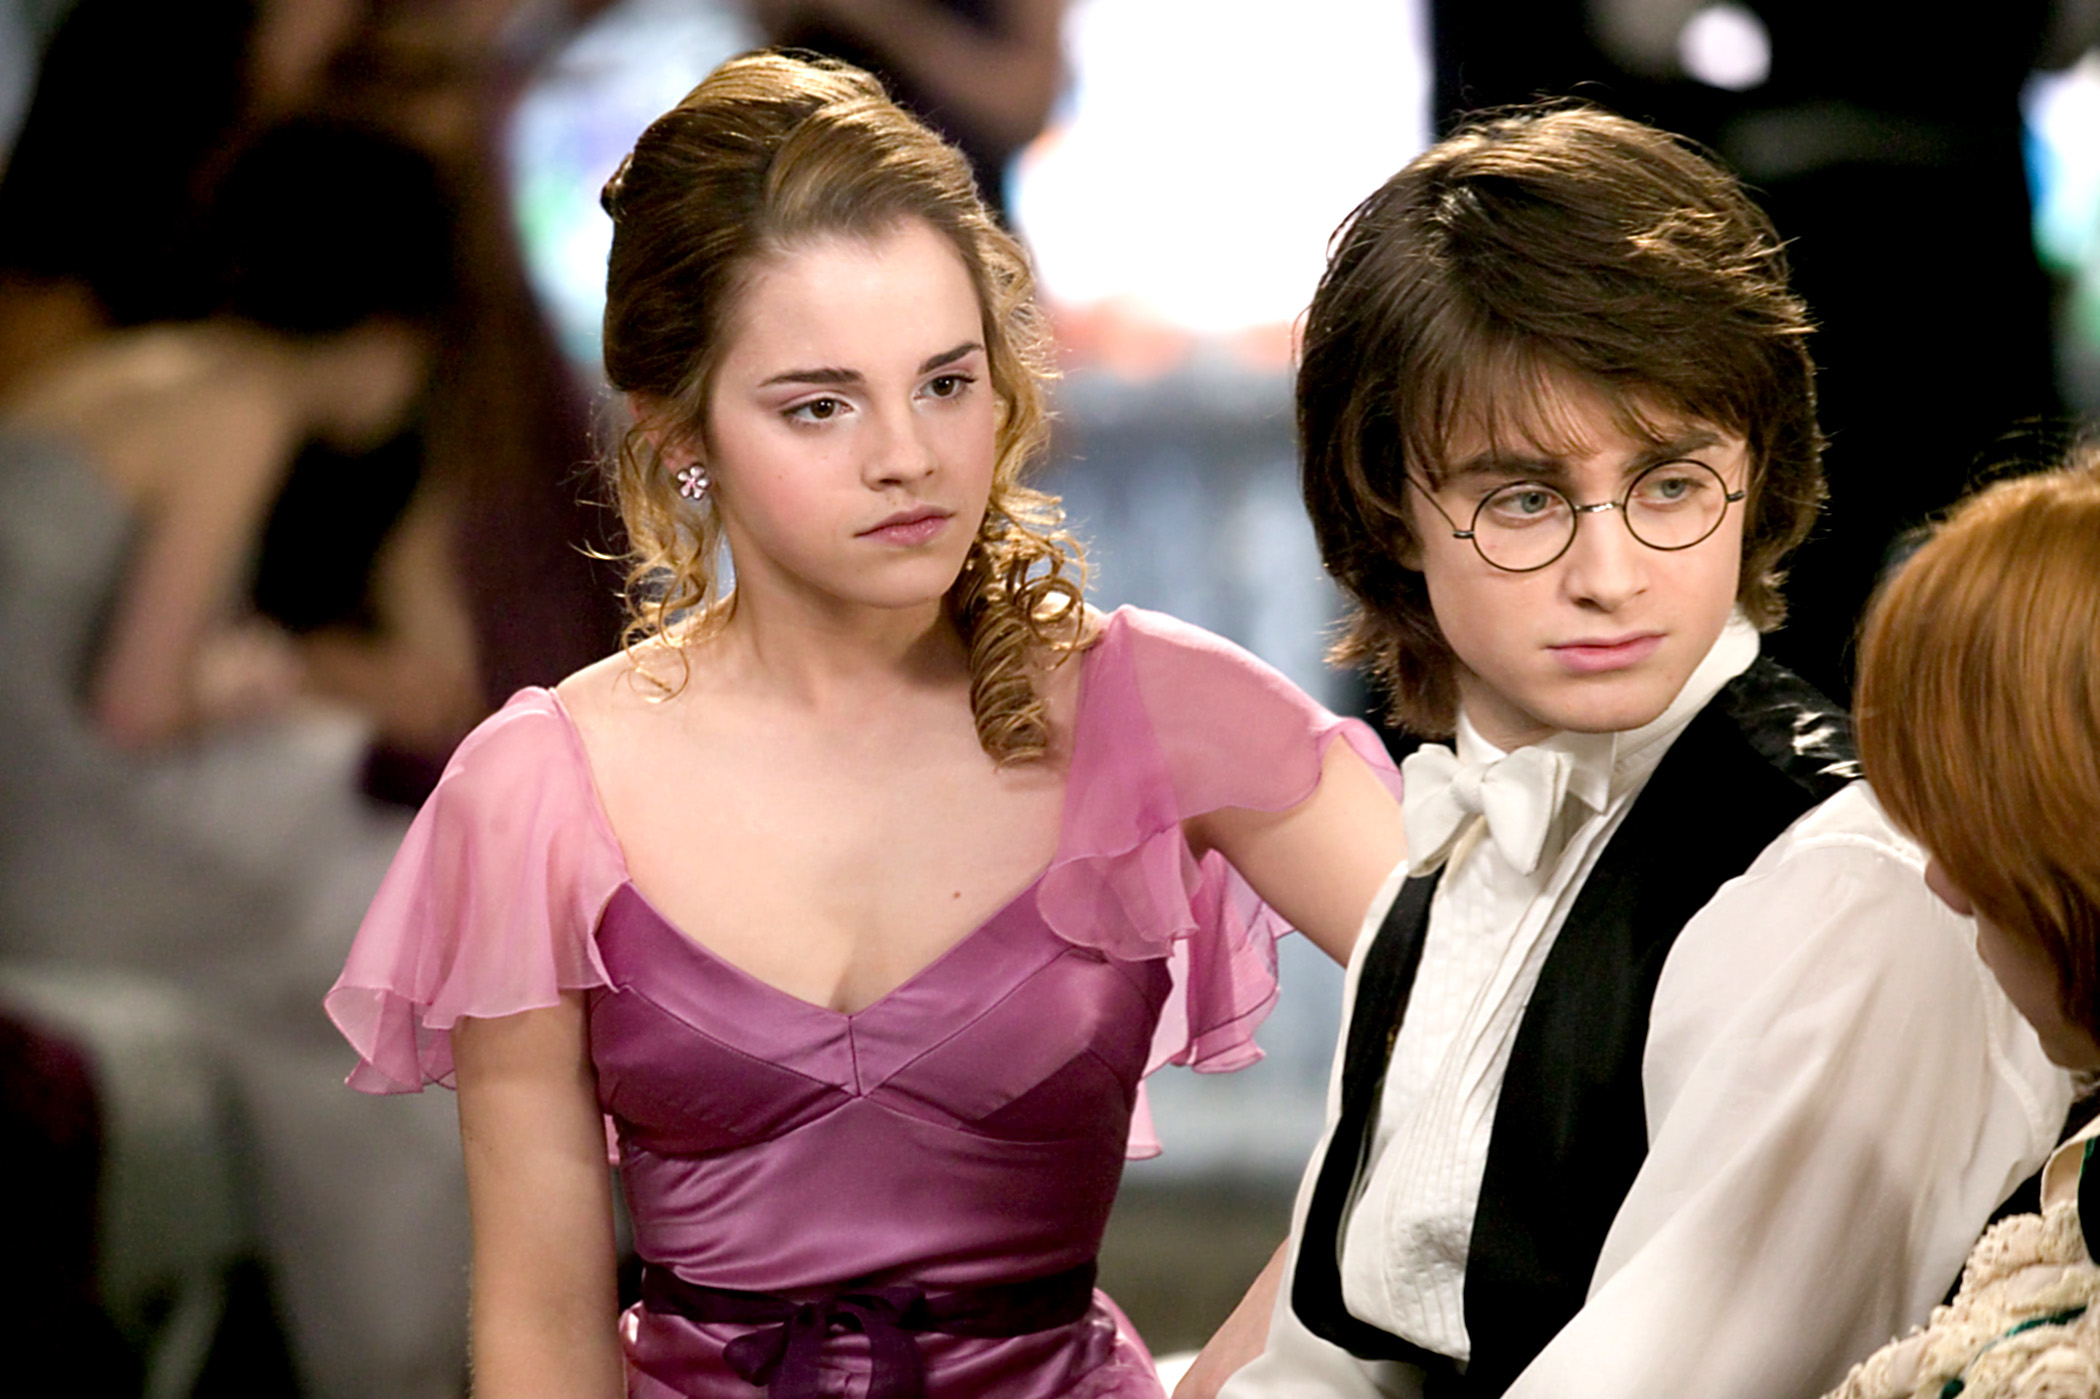 Hermione Granger in a pink dress and Harry Potter in a formal suit at a dance event